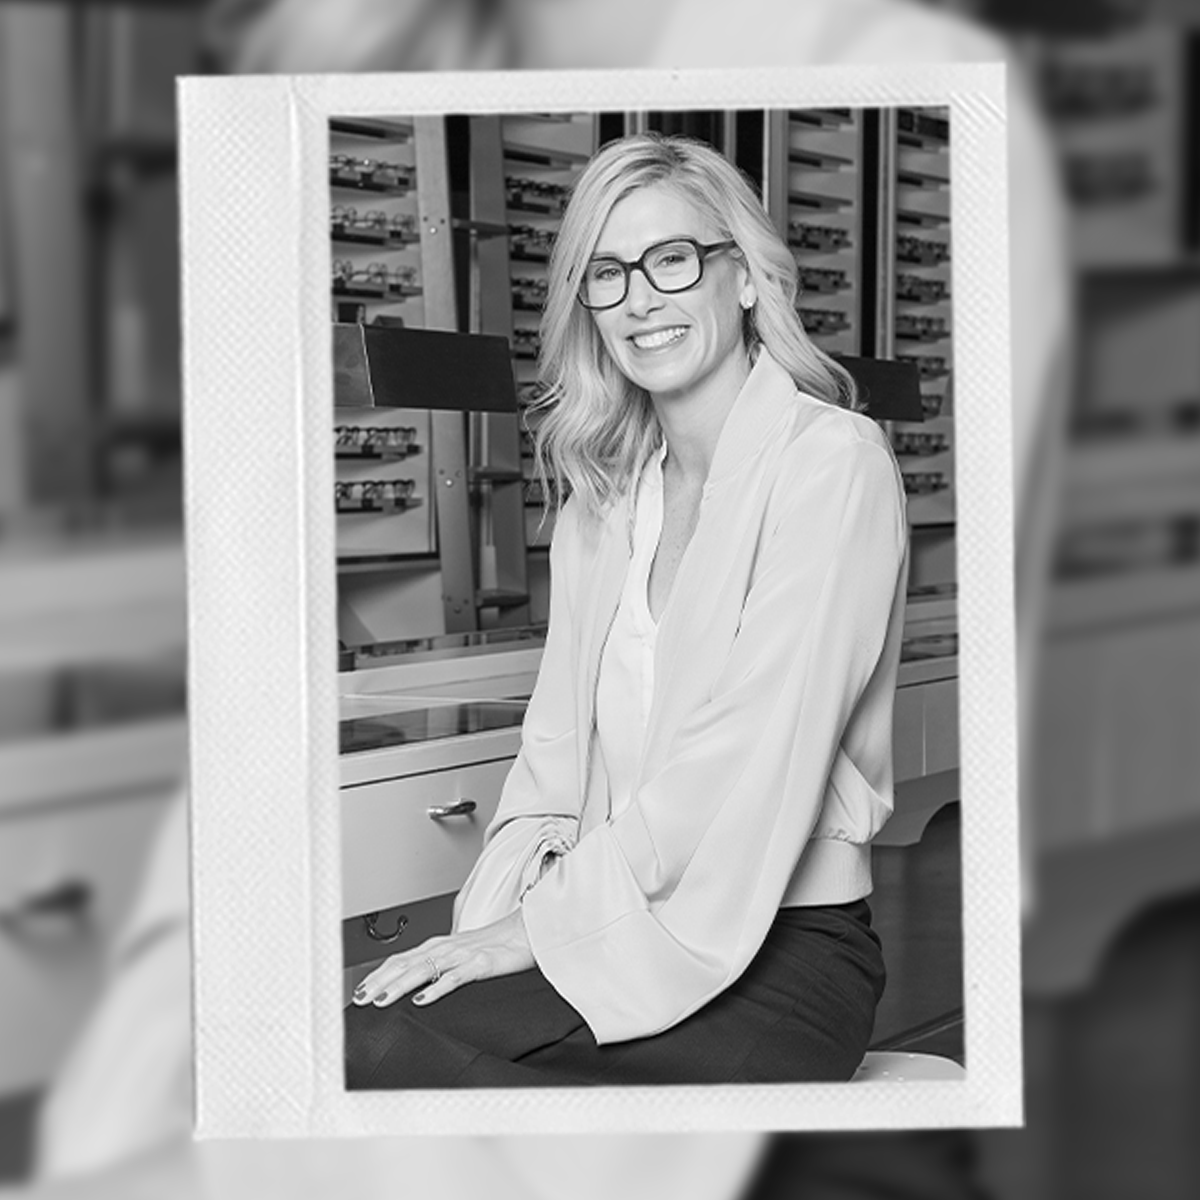 Meet Kim Nemser, the Visionary Behind Warby Parker’s Product Strategy & Growth